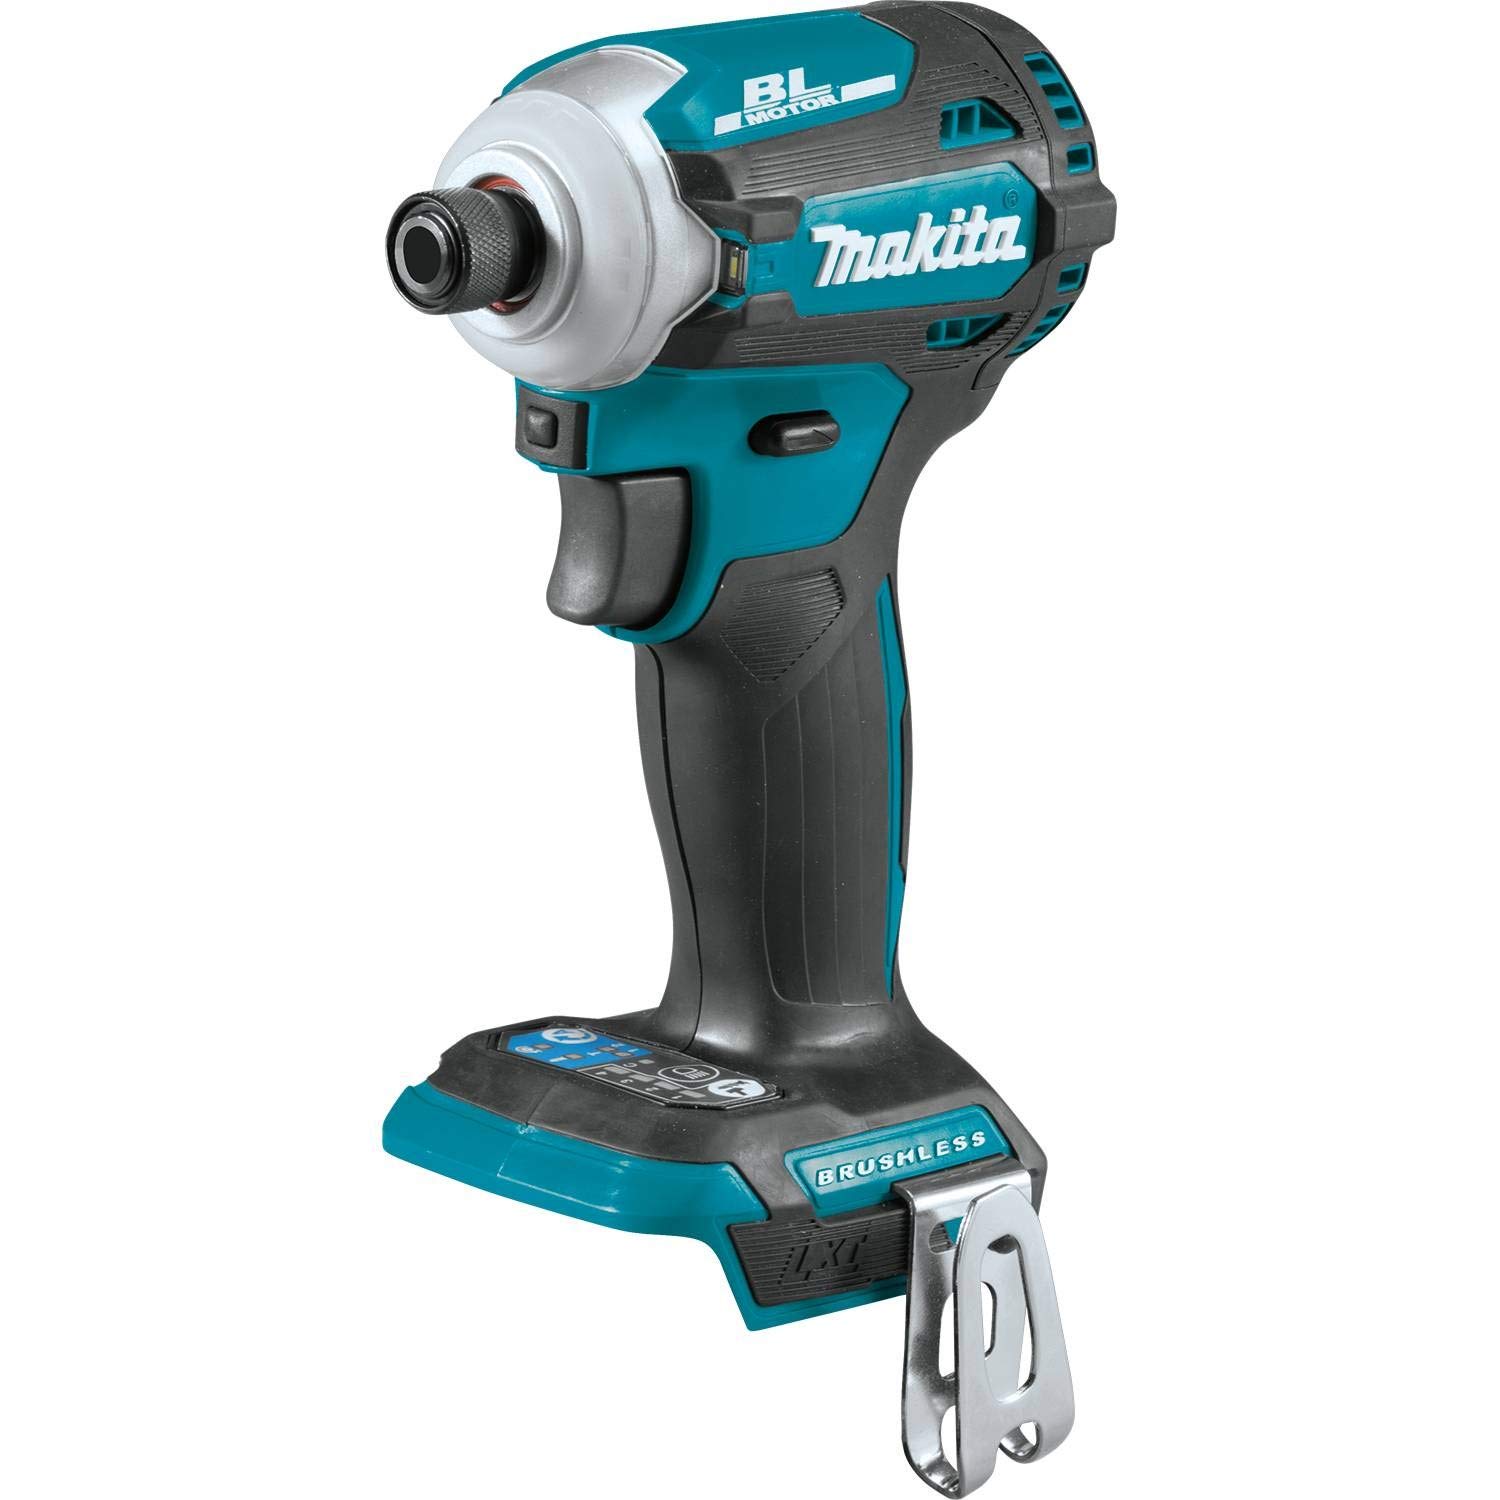 Makita XDT16Z 18V LXT Lithium-Ion Brushless Cordless Quick-Shift Mode 4-Speed Impact Driver Tool Only並行輸入品